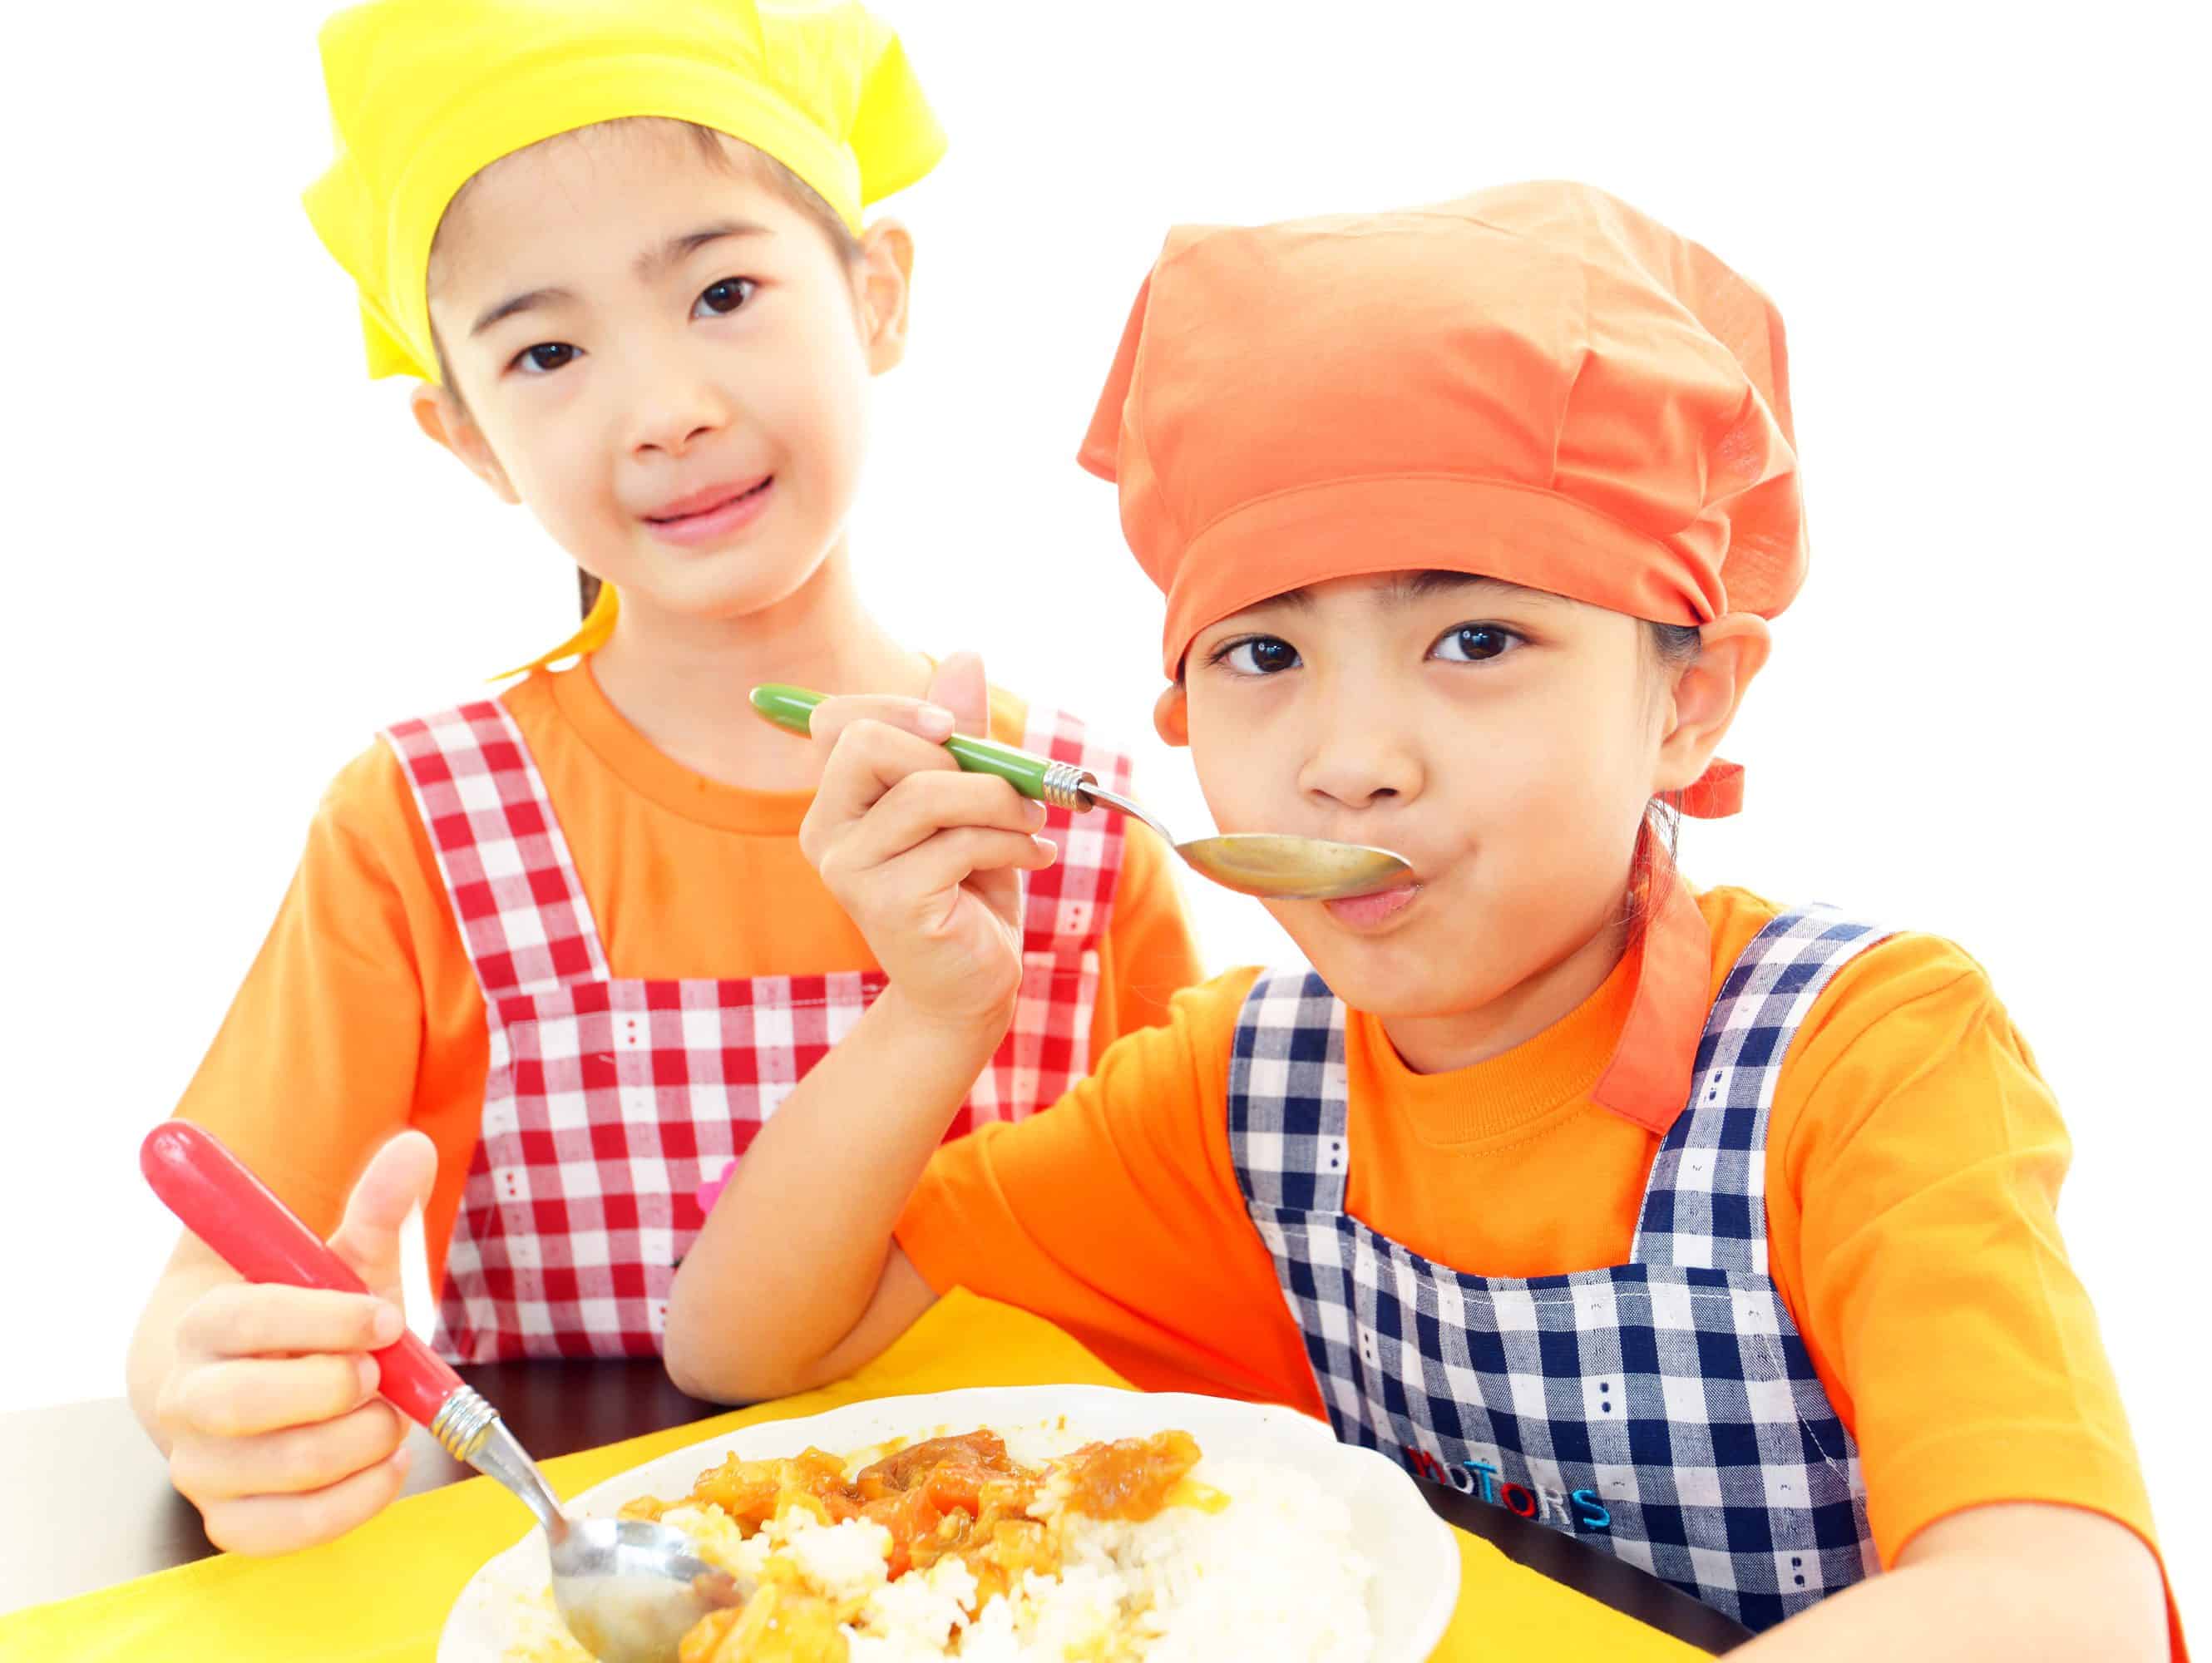 frozen food is an easy go-to option for kids